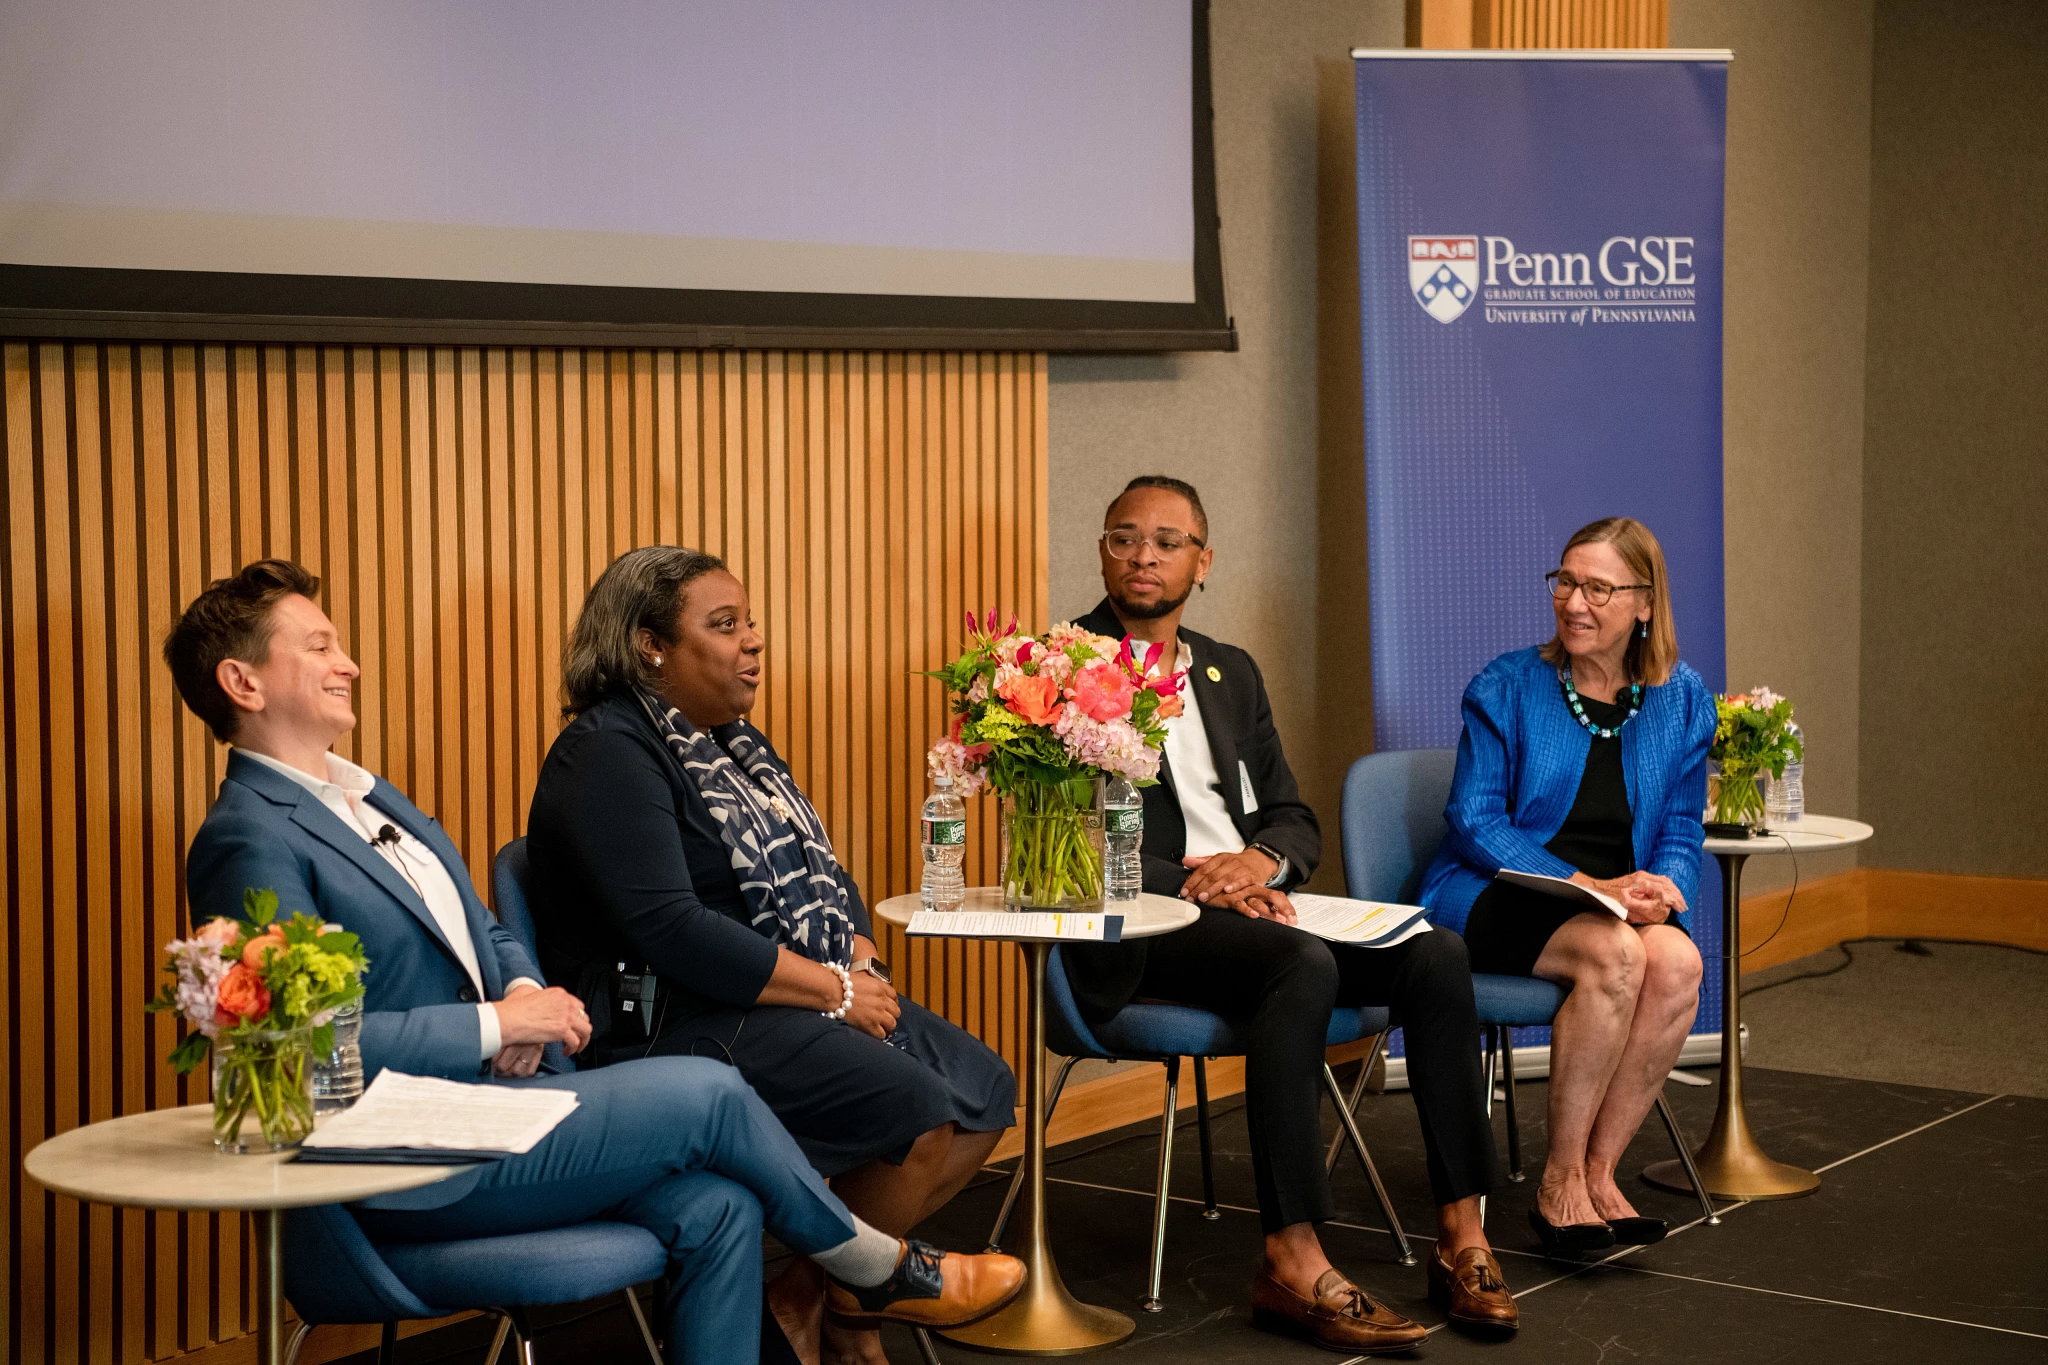 The four panelists look at each other and smile while engaged in conversation, sitting in front of a Penn GSE banner.